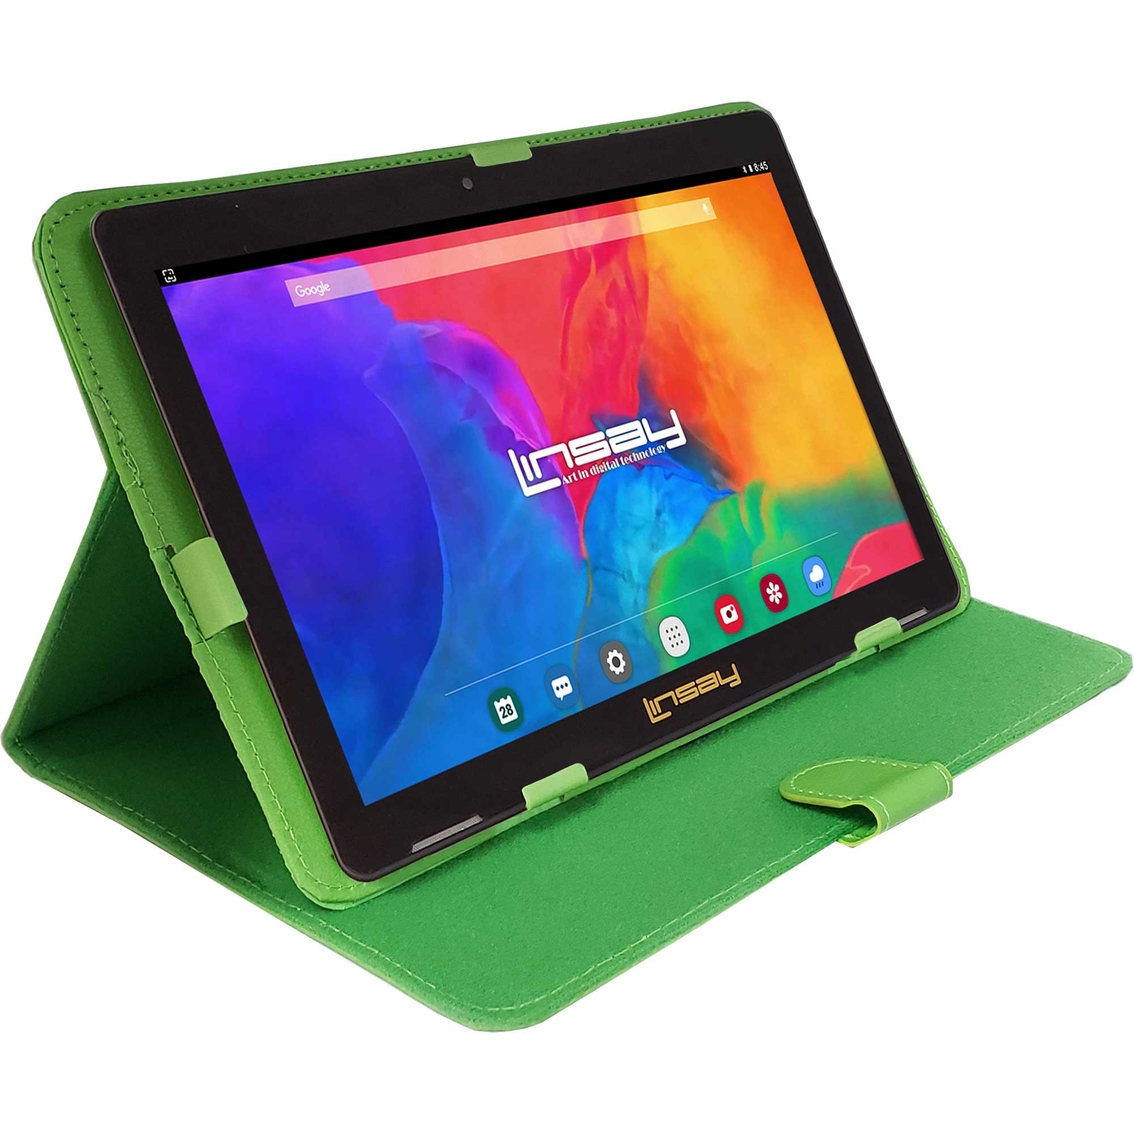 Linsay 10.1 in. 2GB RAM 32GB Tablet with Case, Holder and Pen Bundle - Image 3 of 3